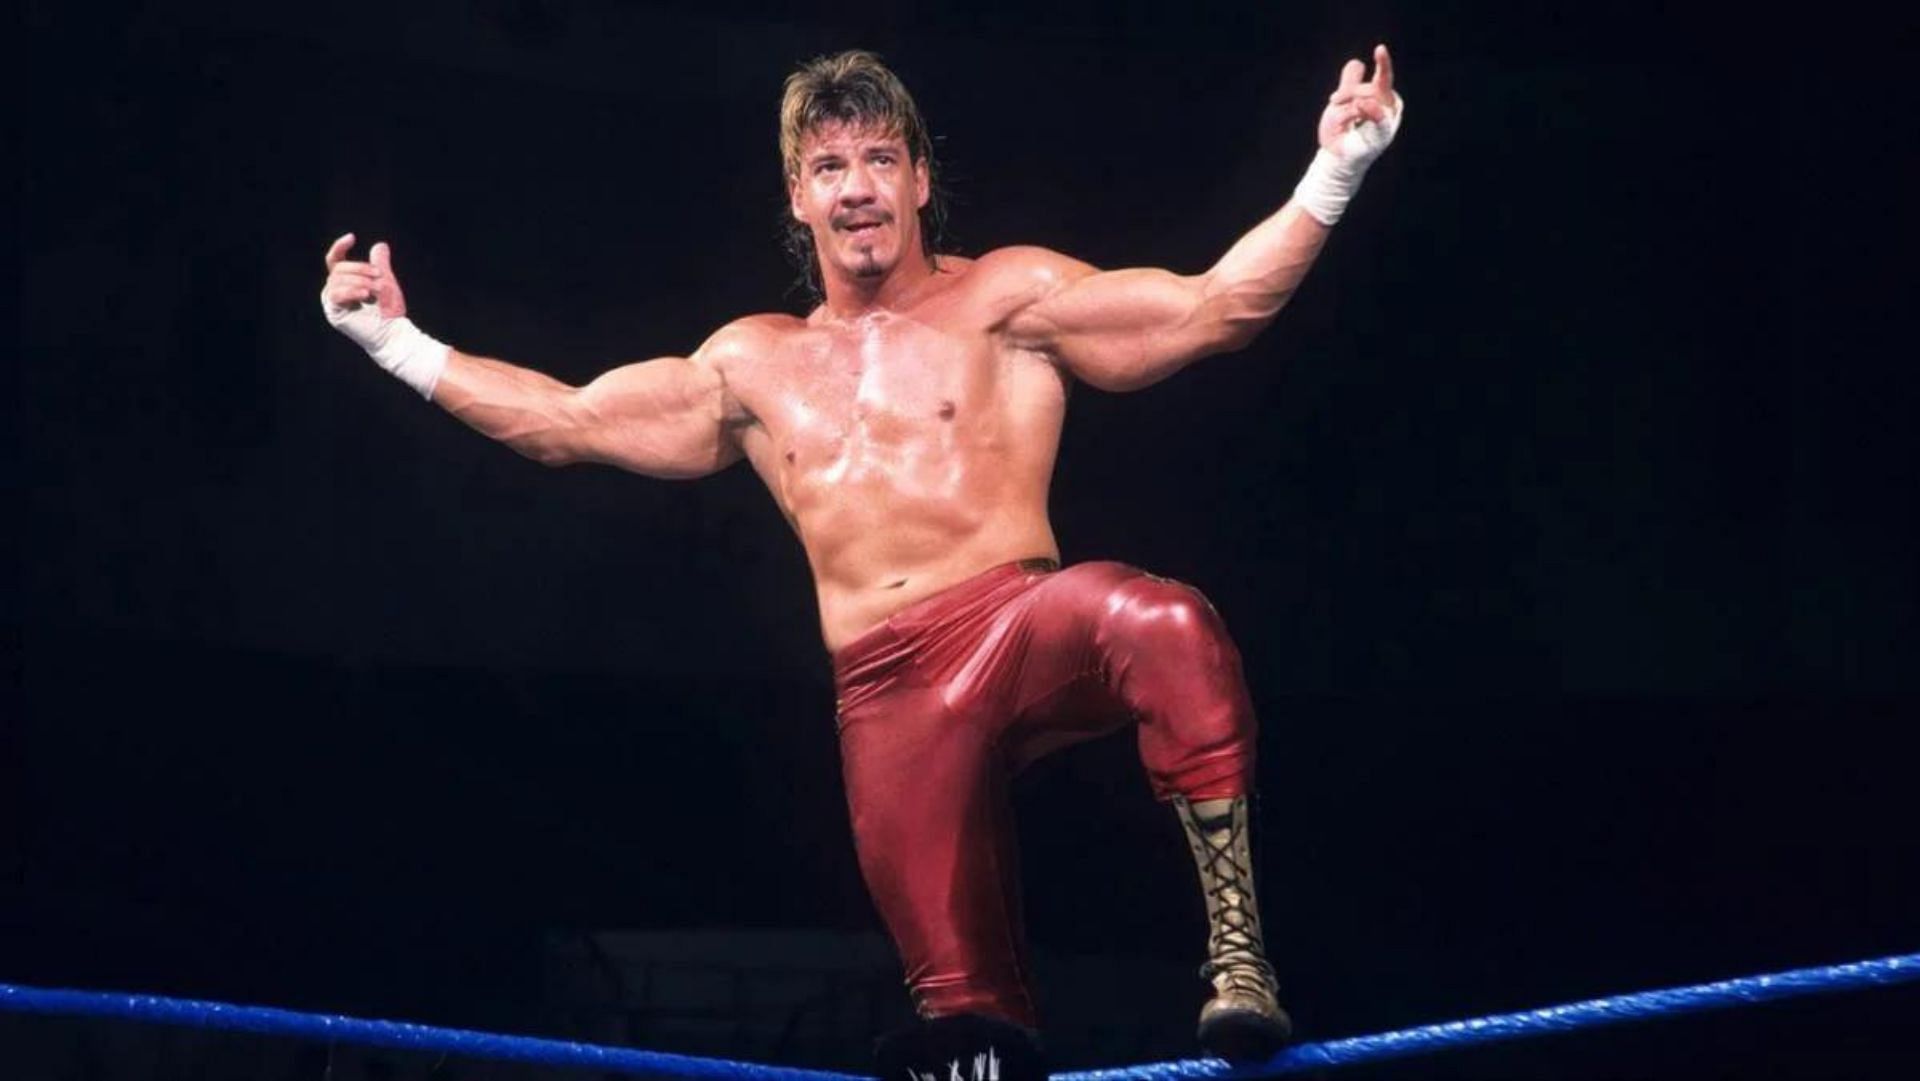 Did Eddie Guerrero have a heart attack in the ring?